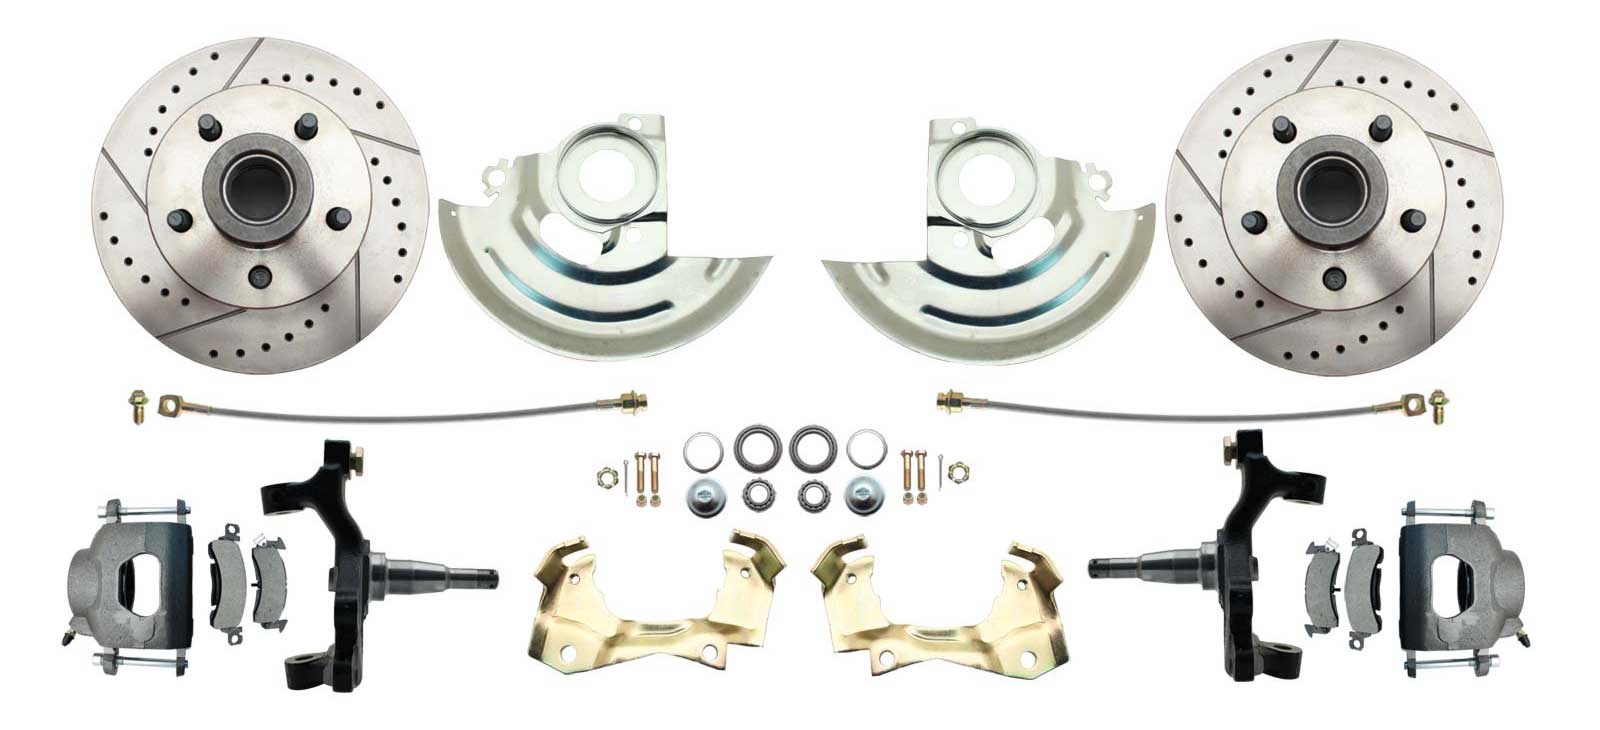 1964-1972 GM A Body (Chevelle, GTO, Cutlass) 2 Drop Front Disc Brake Kit W/ Drilled & Slotted Rotors